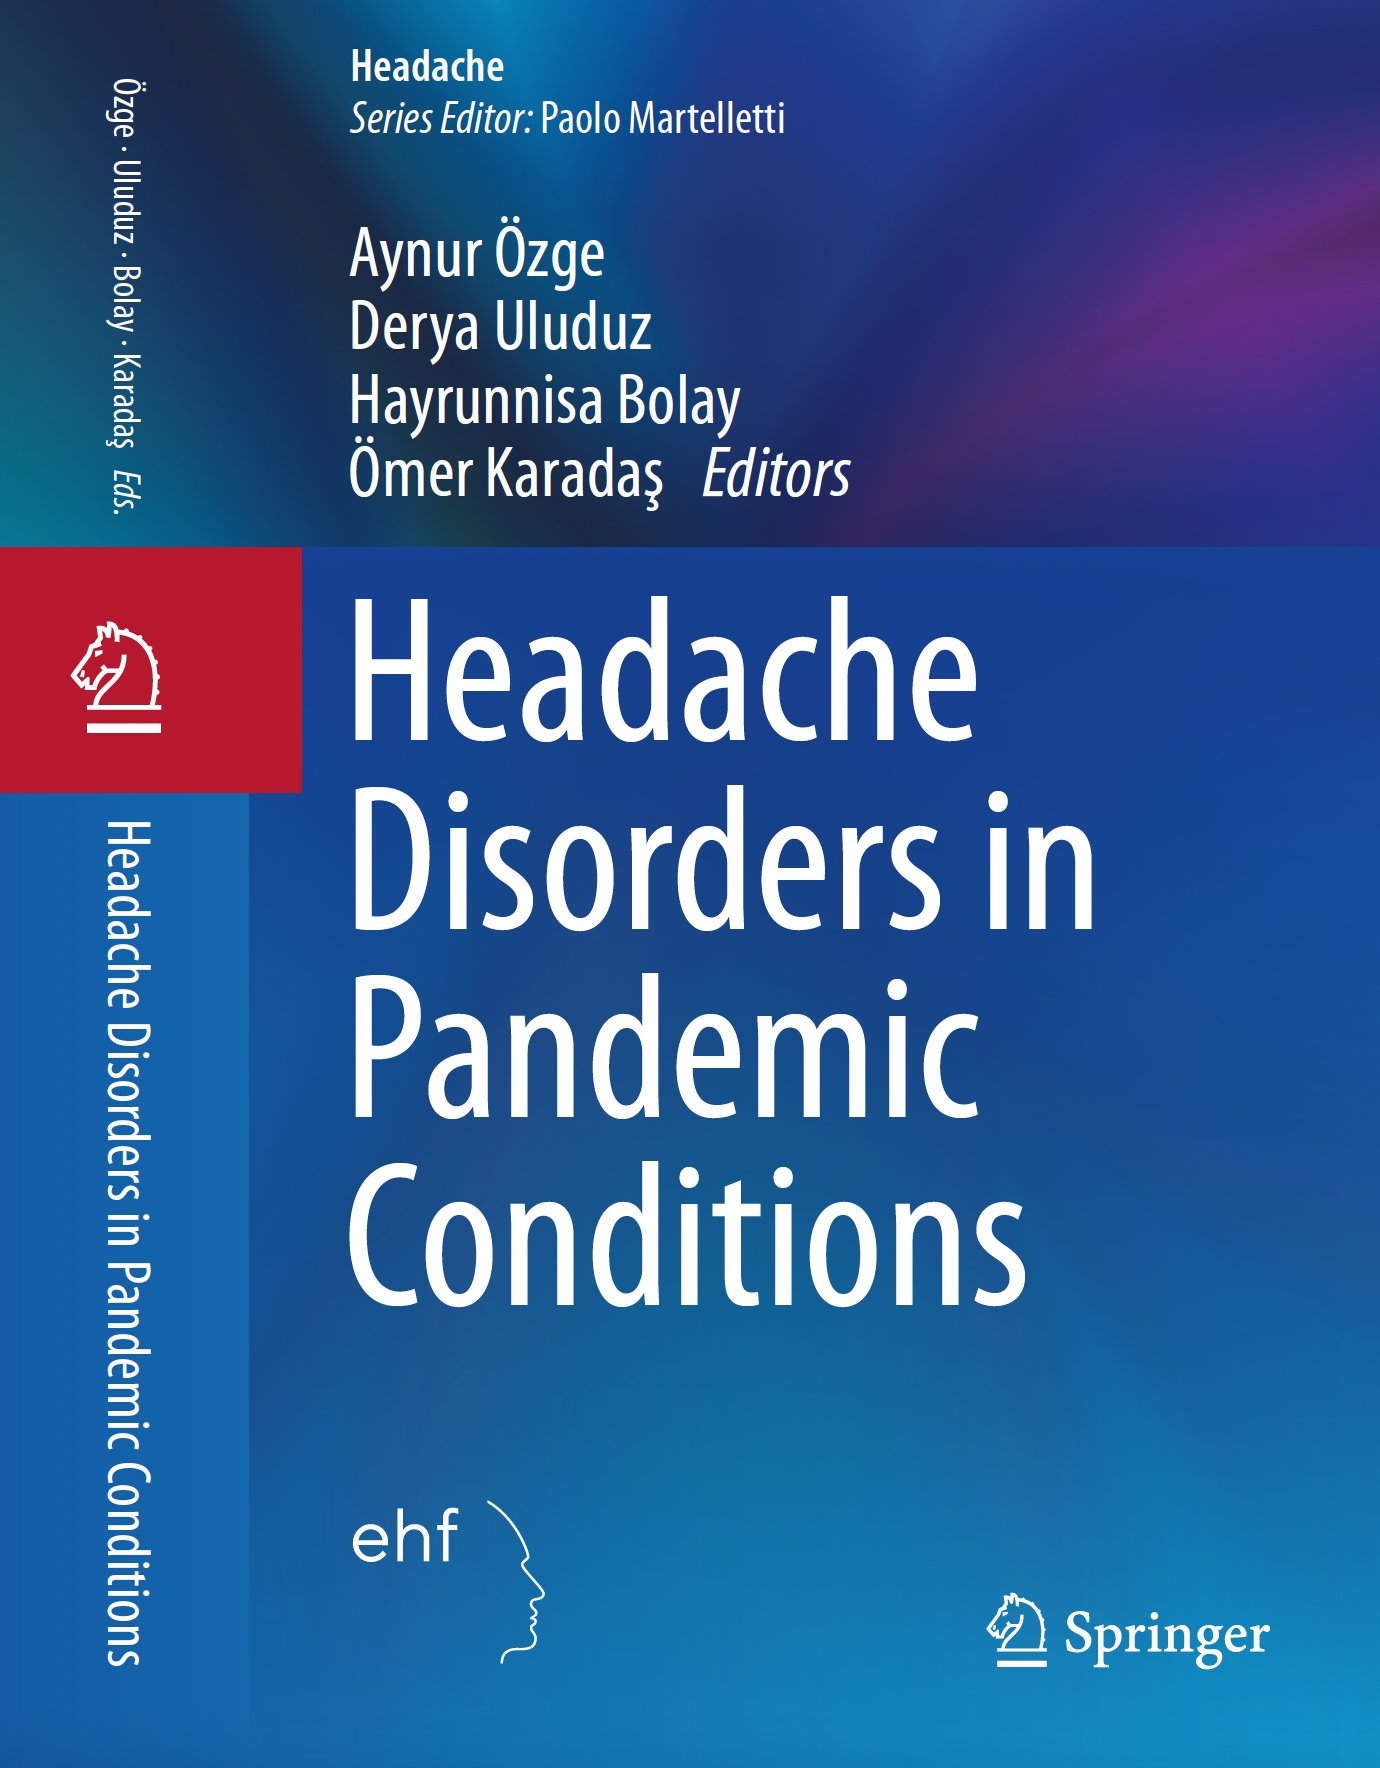 Headache Disorders in Pandemic Conditions'-1